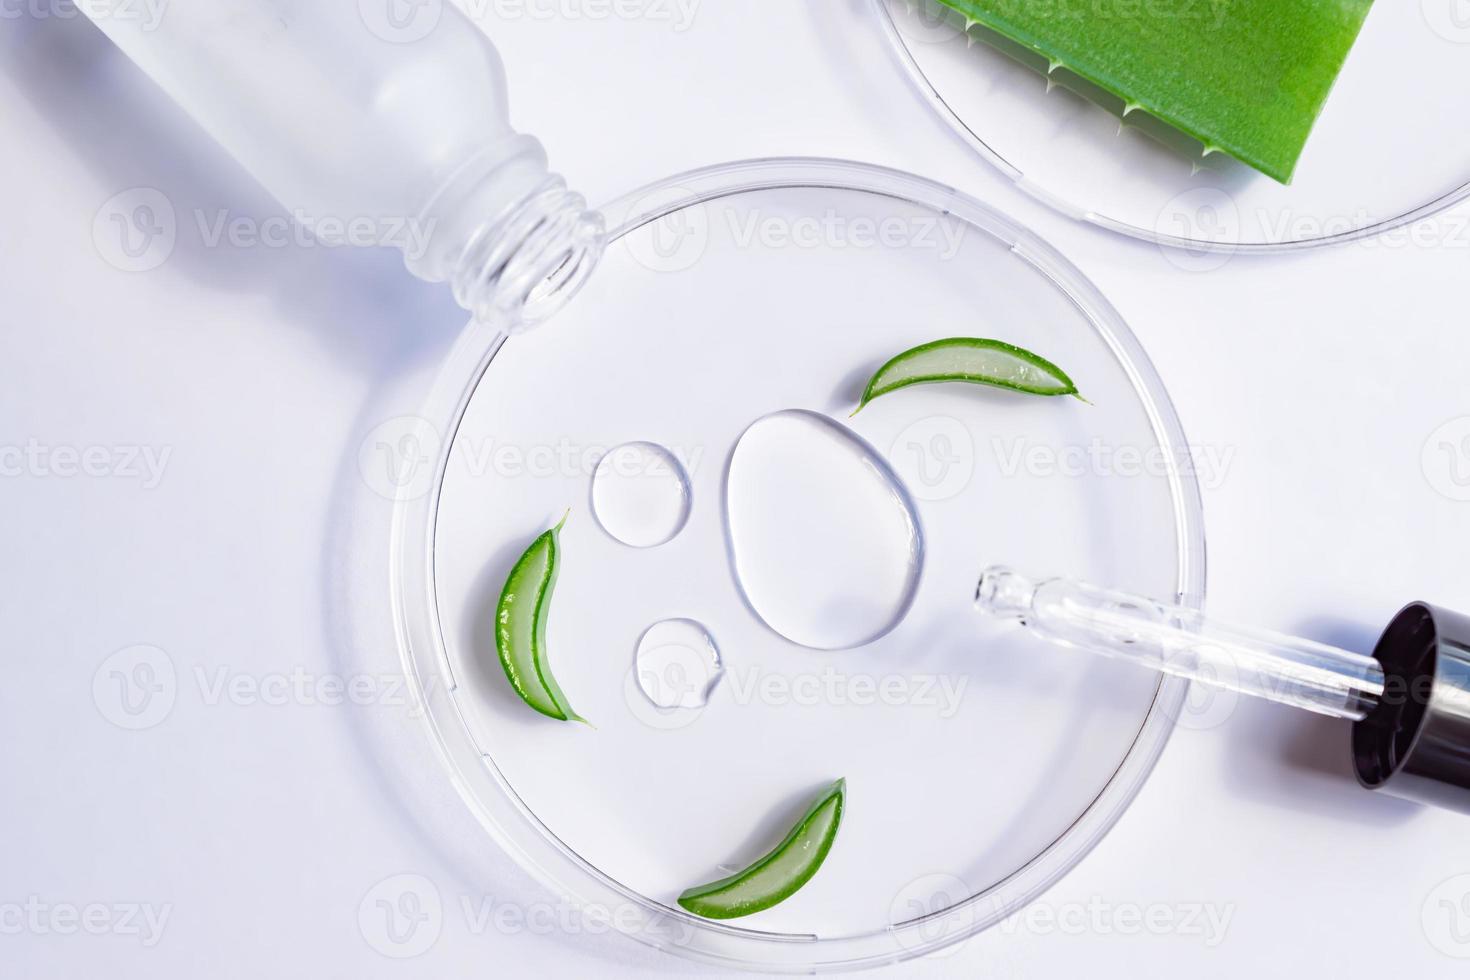 aloe vera face serum in a bottle with dropper and aloe leaf in a laboratory Petri dish. dermatology concept. skin care cosmetic solution for nourishing and moisturizing. top view photo